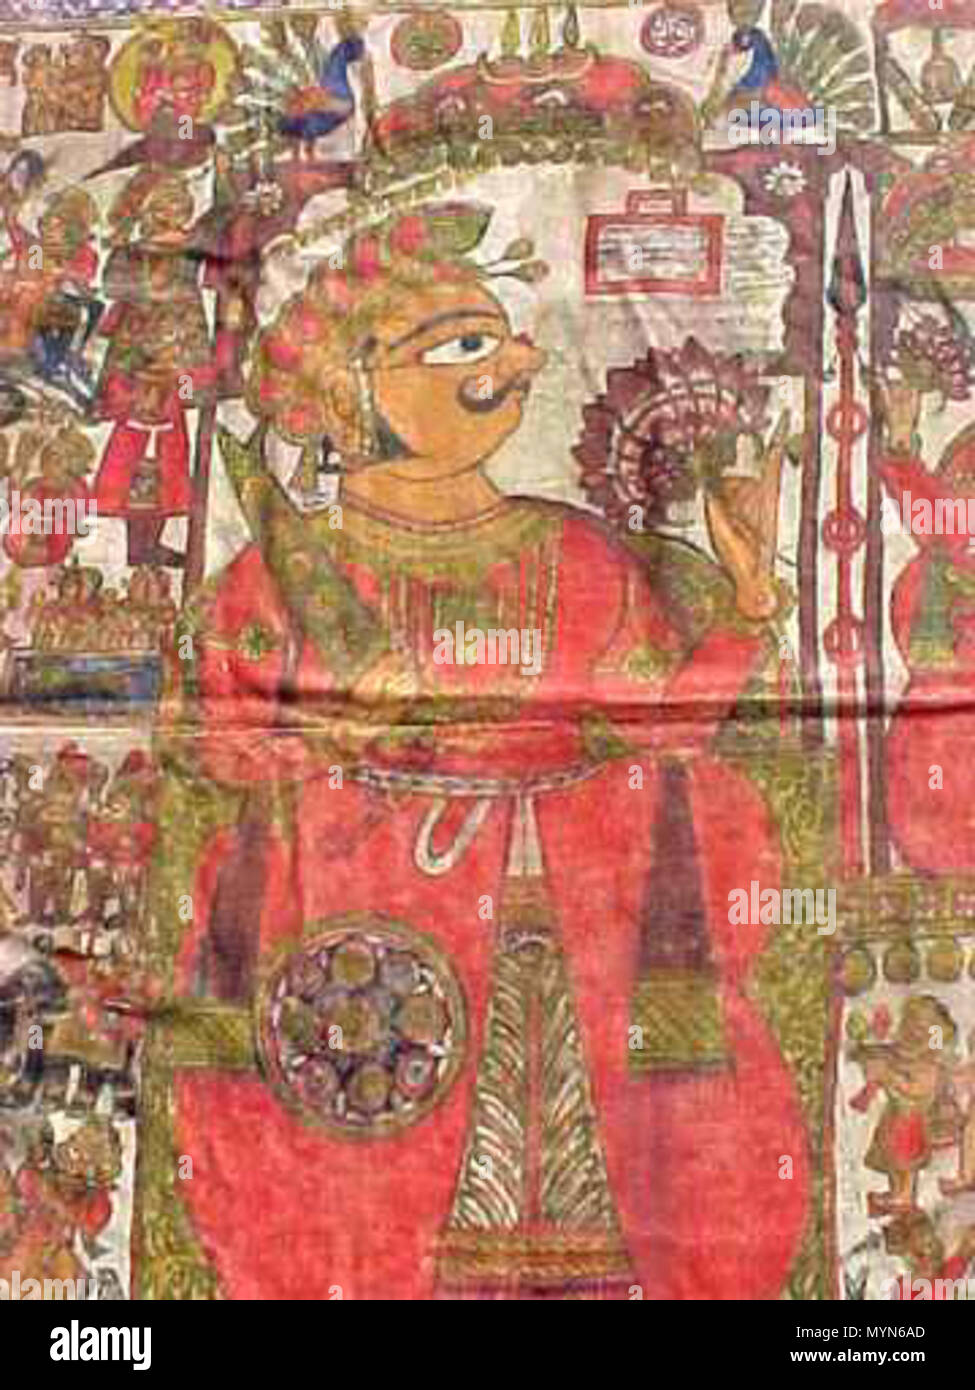 . English: A series of images of another par of Pabuji, this one from the early 19th century Source: ebay, April 2002 'This is an old (mid 1800s or earlier) Par. The painted textile is approximately 16 feet long and 55 1/2 inches wide. The story painting has been used to relay the story many times through the years and shows normal wear, especially on the bottom edge. There are some old repairs. The textile is made of two narrow pieces ( 26 3/4') sewen together. It appears to be an old linen-type material.' . early 19th century. Unknown 403 Pabuji2c Stock Photo